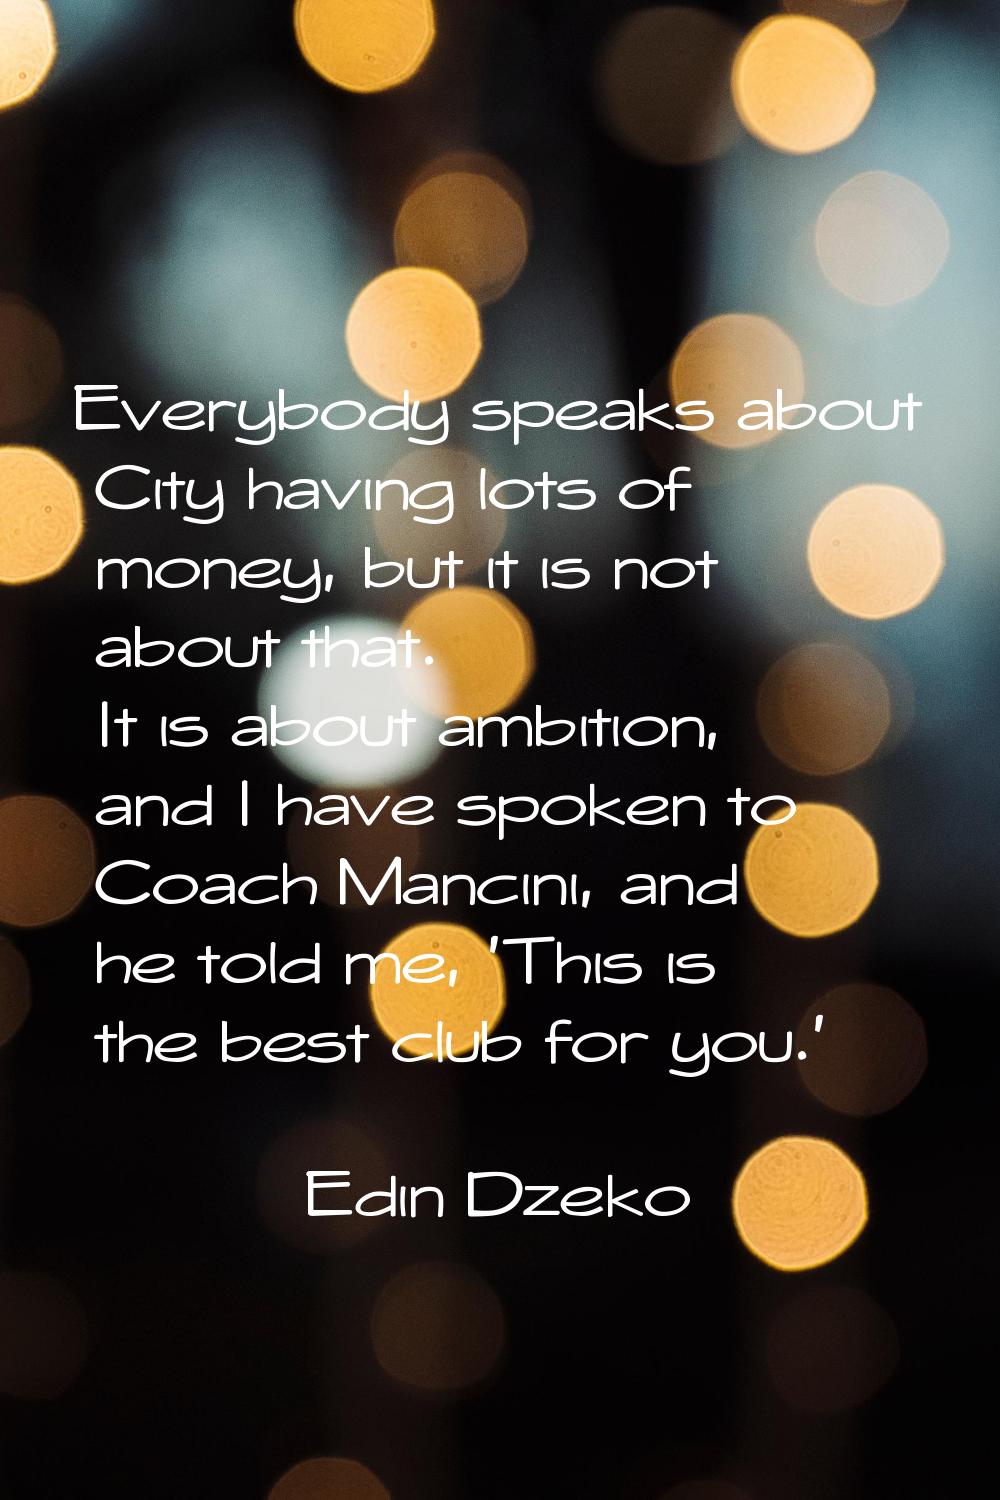 Everybody speaks about City having lots of money, but it is not about that. It is about ambition, a